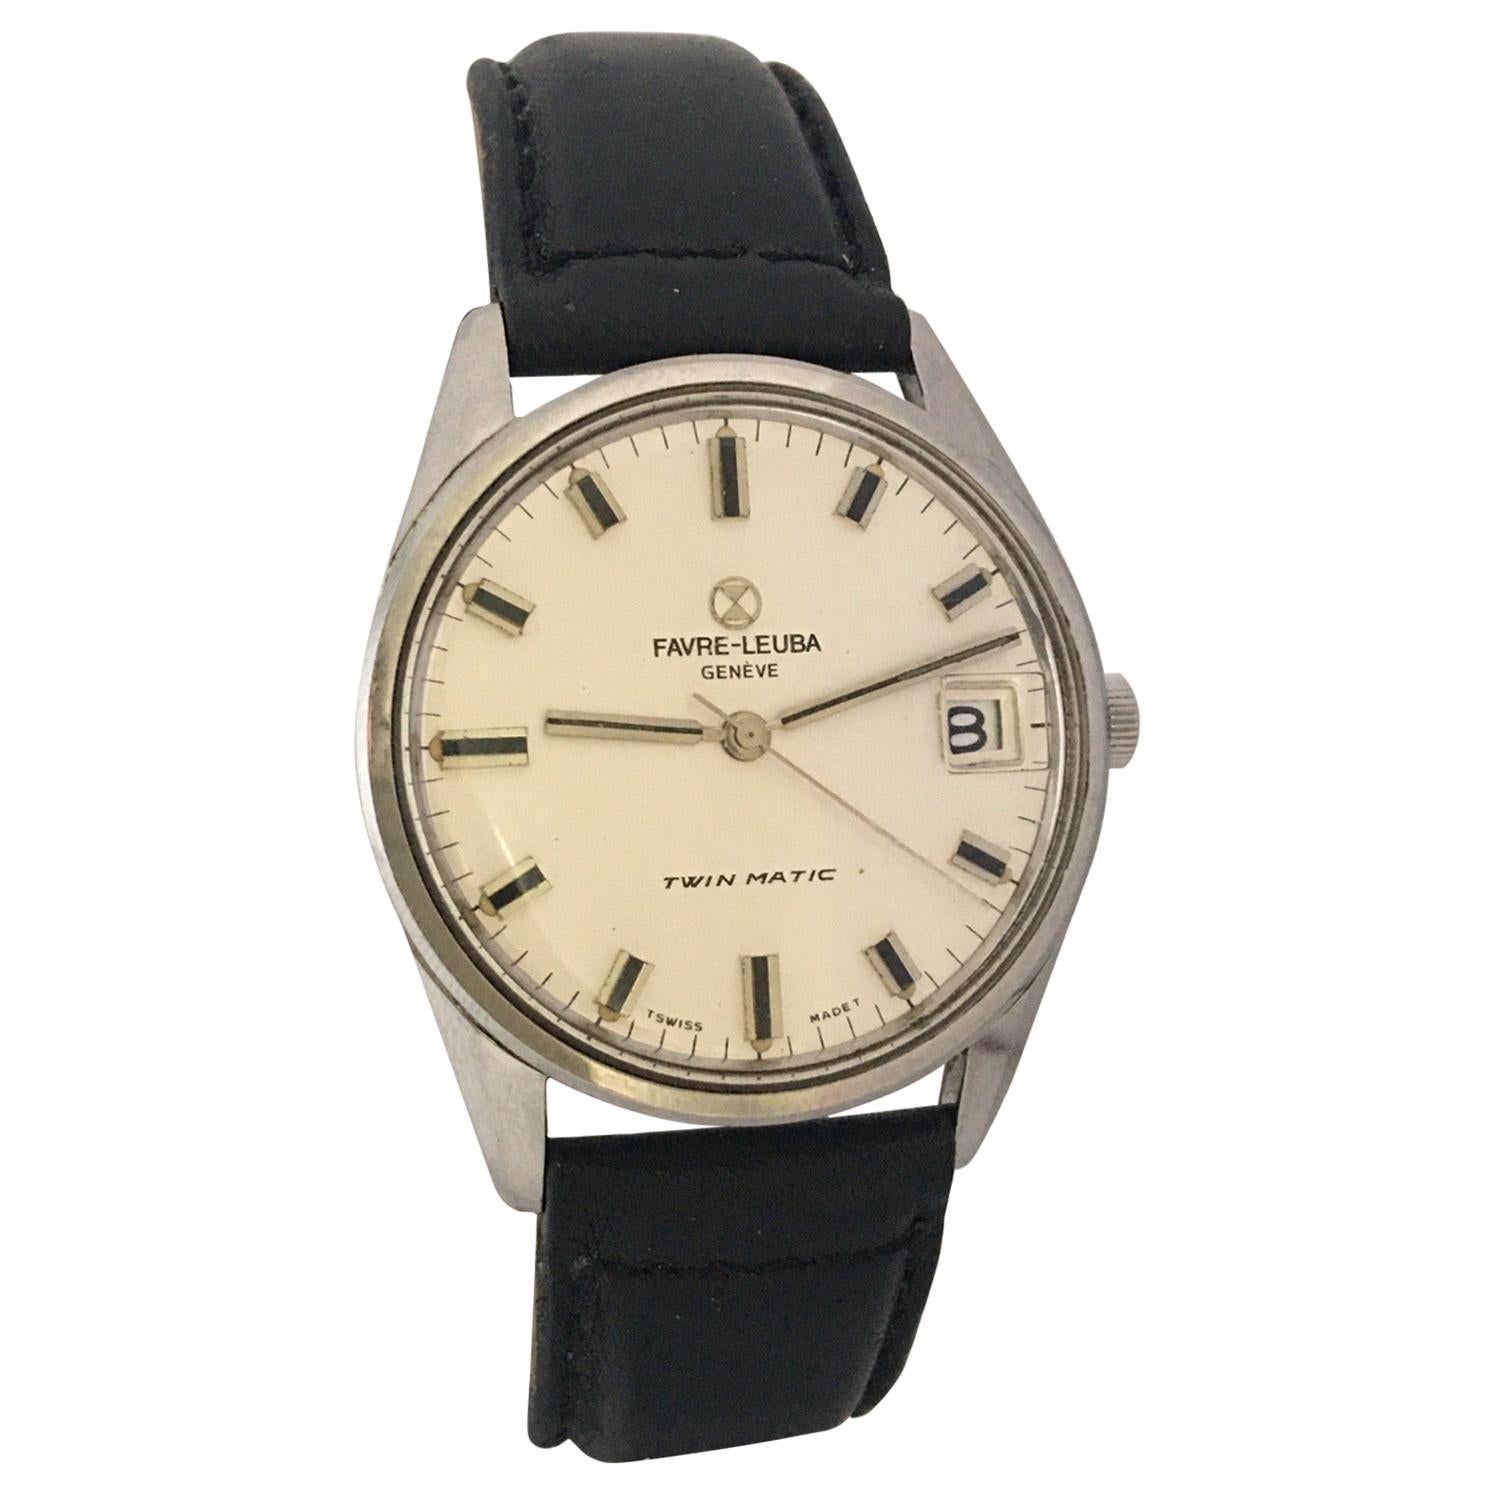 Vintage Stainless Steel Favre-Leuba Geneve Twin Matic Watch For Sale